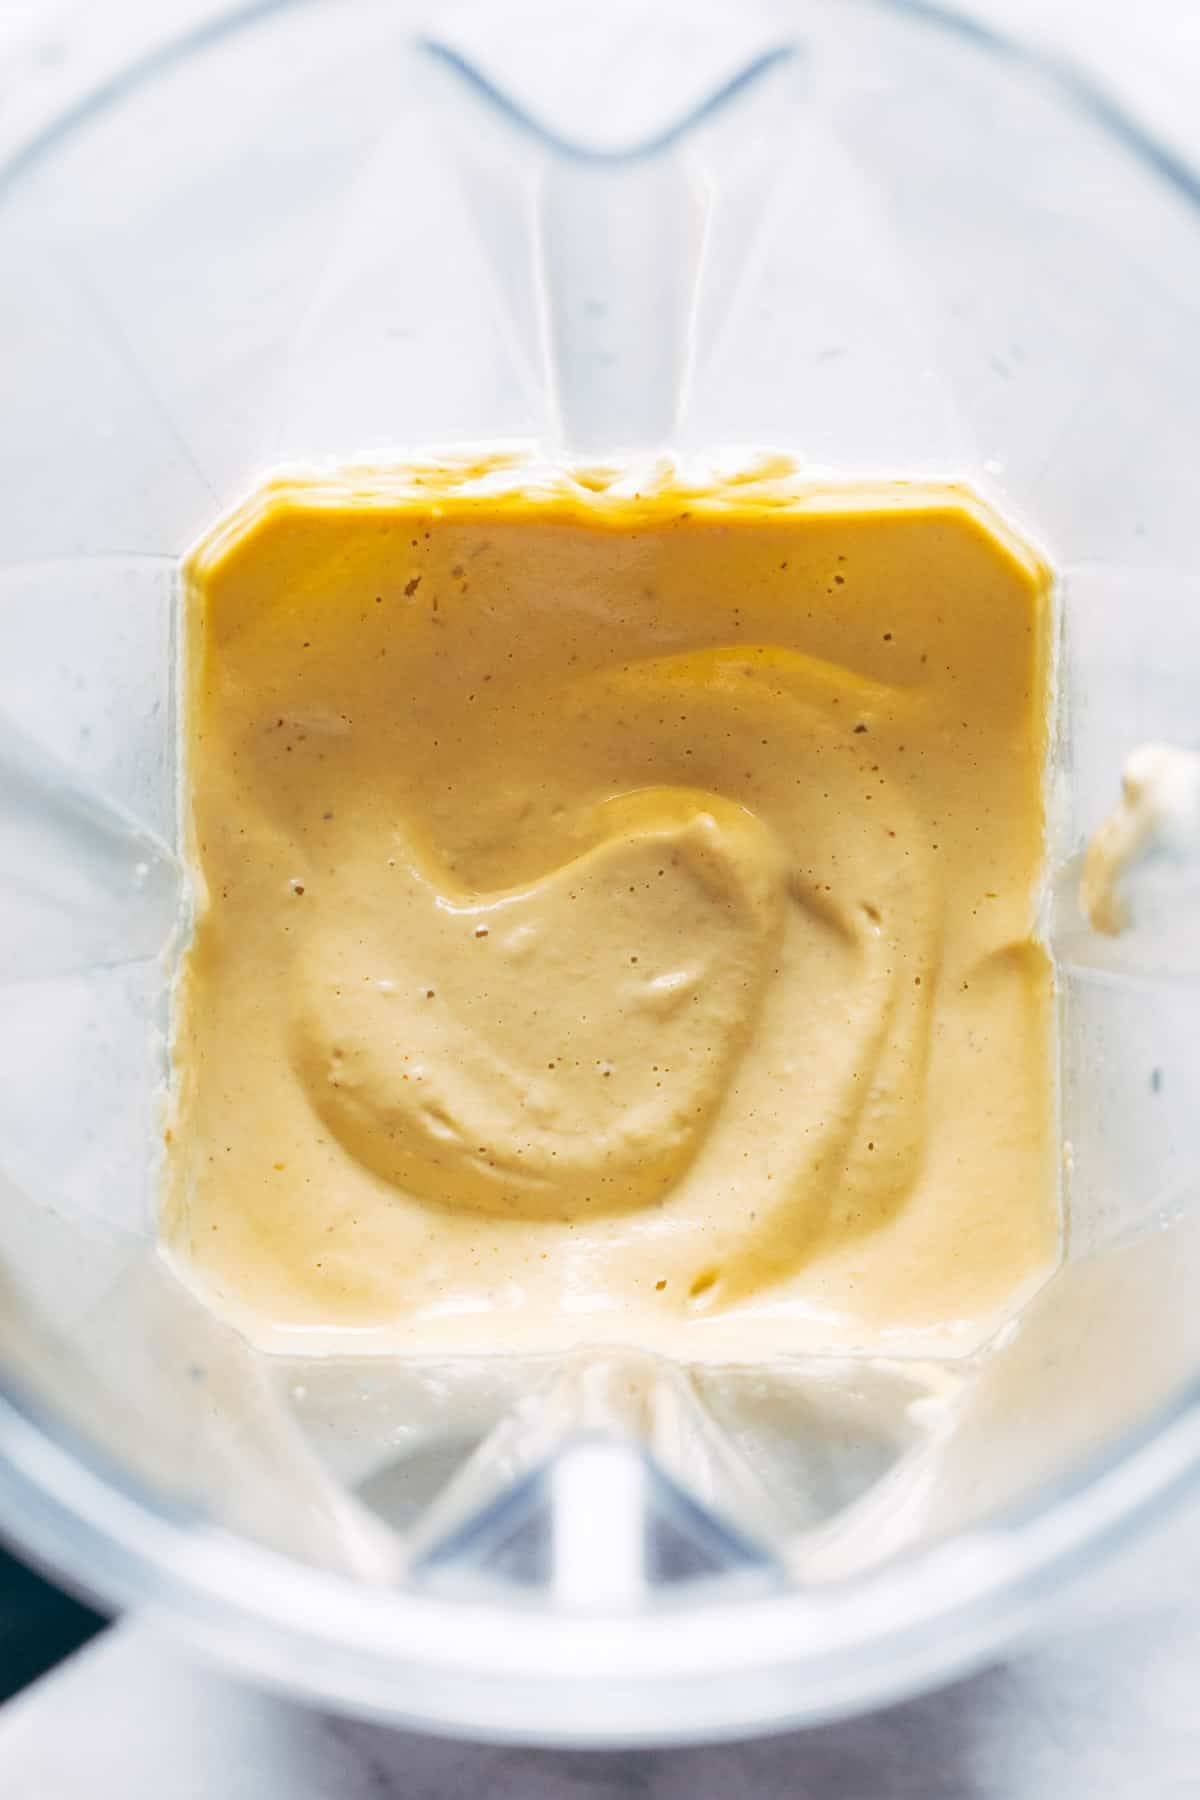 Cashew queso blended in a blender.